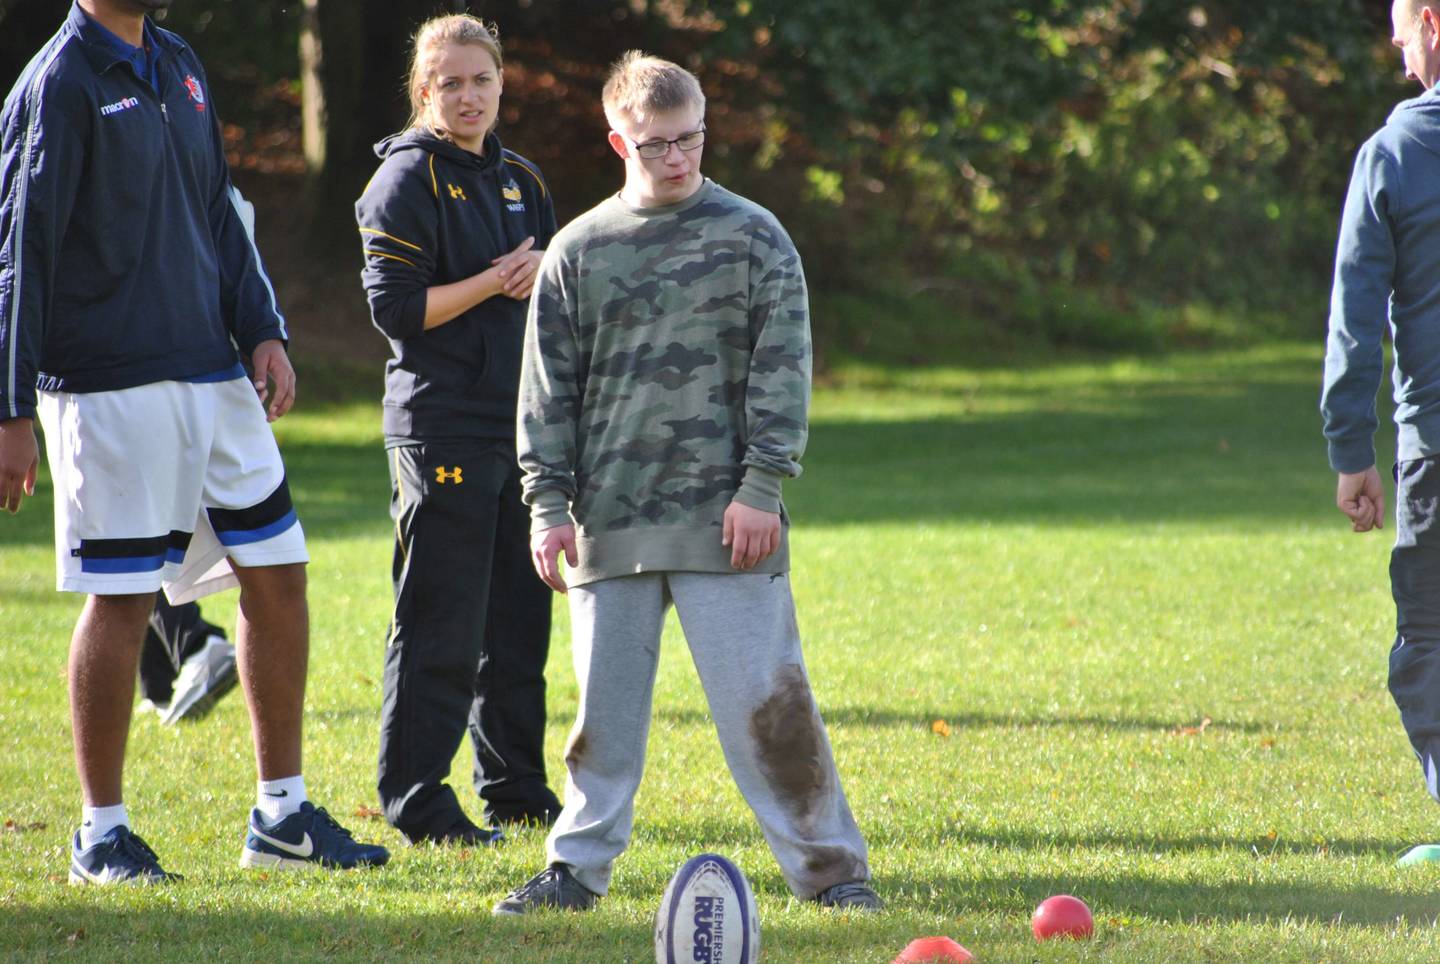 Boy with Down syndrome about to kick rugby ball